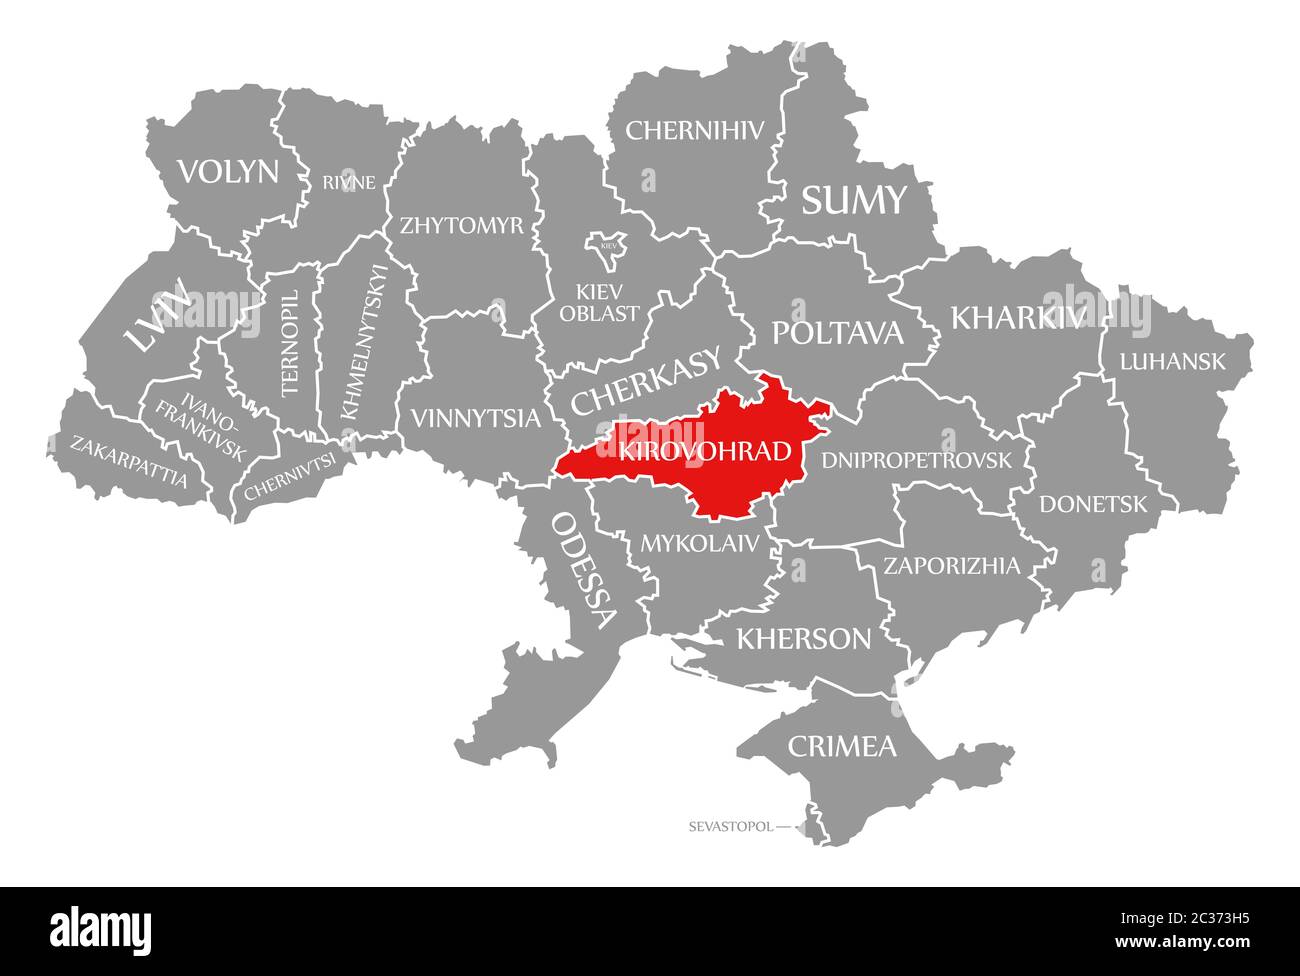 Kirovohrad red highlighted in map of the Ukraine Stock Photo